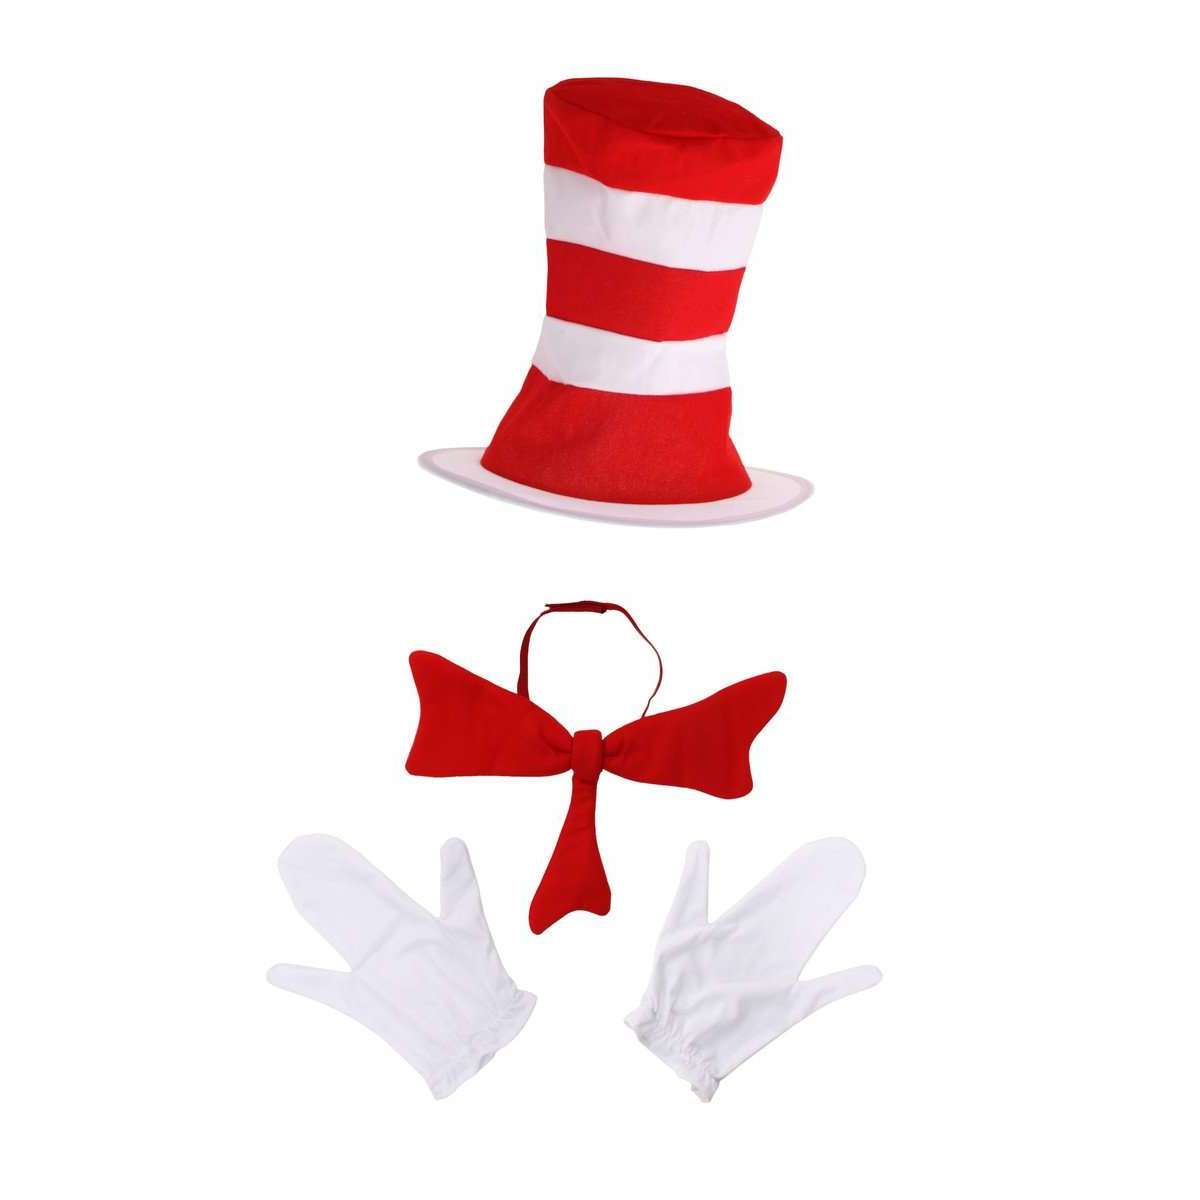 Dr Seuss Cat in the Hat Adult Accessory Kit w/ Hat, Bow Tie & Gloves